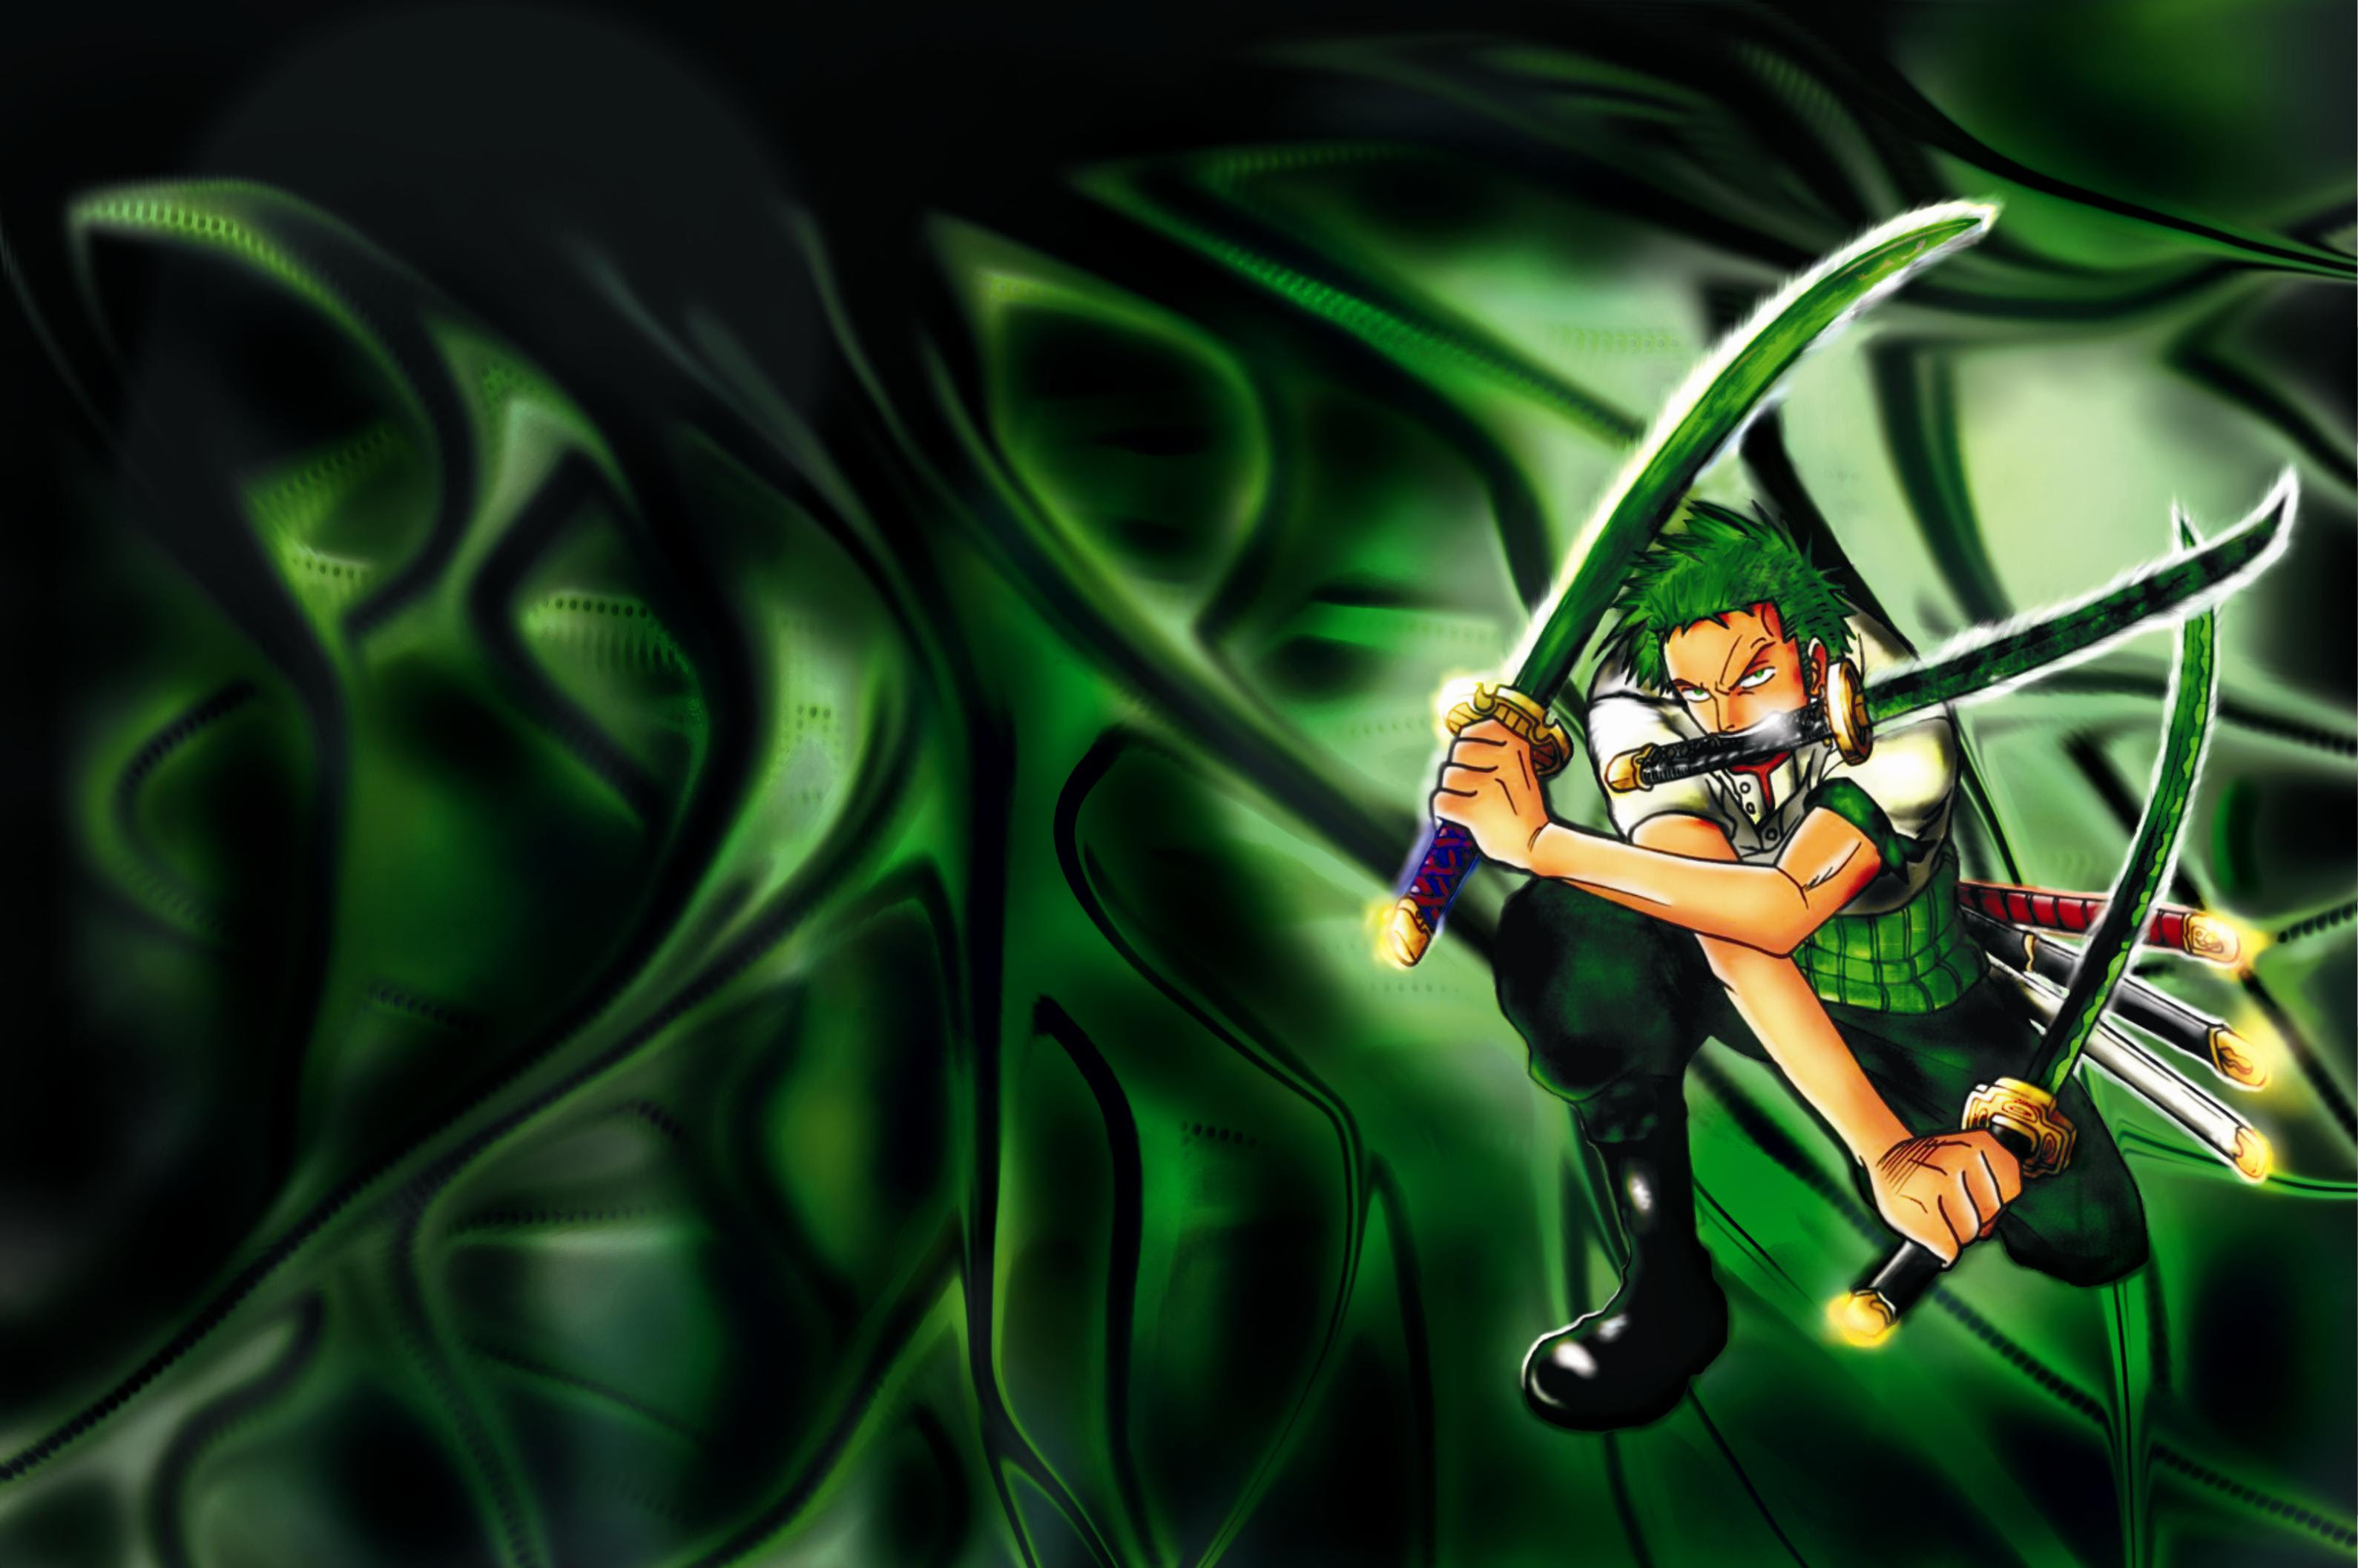 Tons of awesome one piece zoro wallpapers to download for free Wallpapers Hd One Piece Zoro